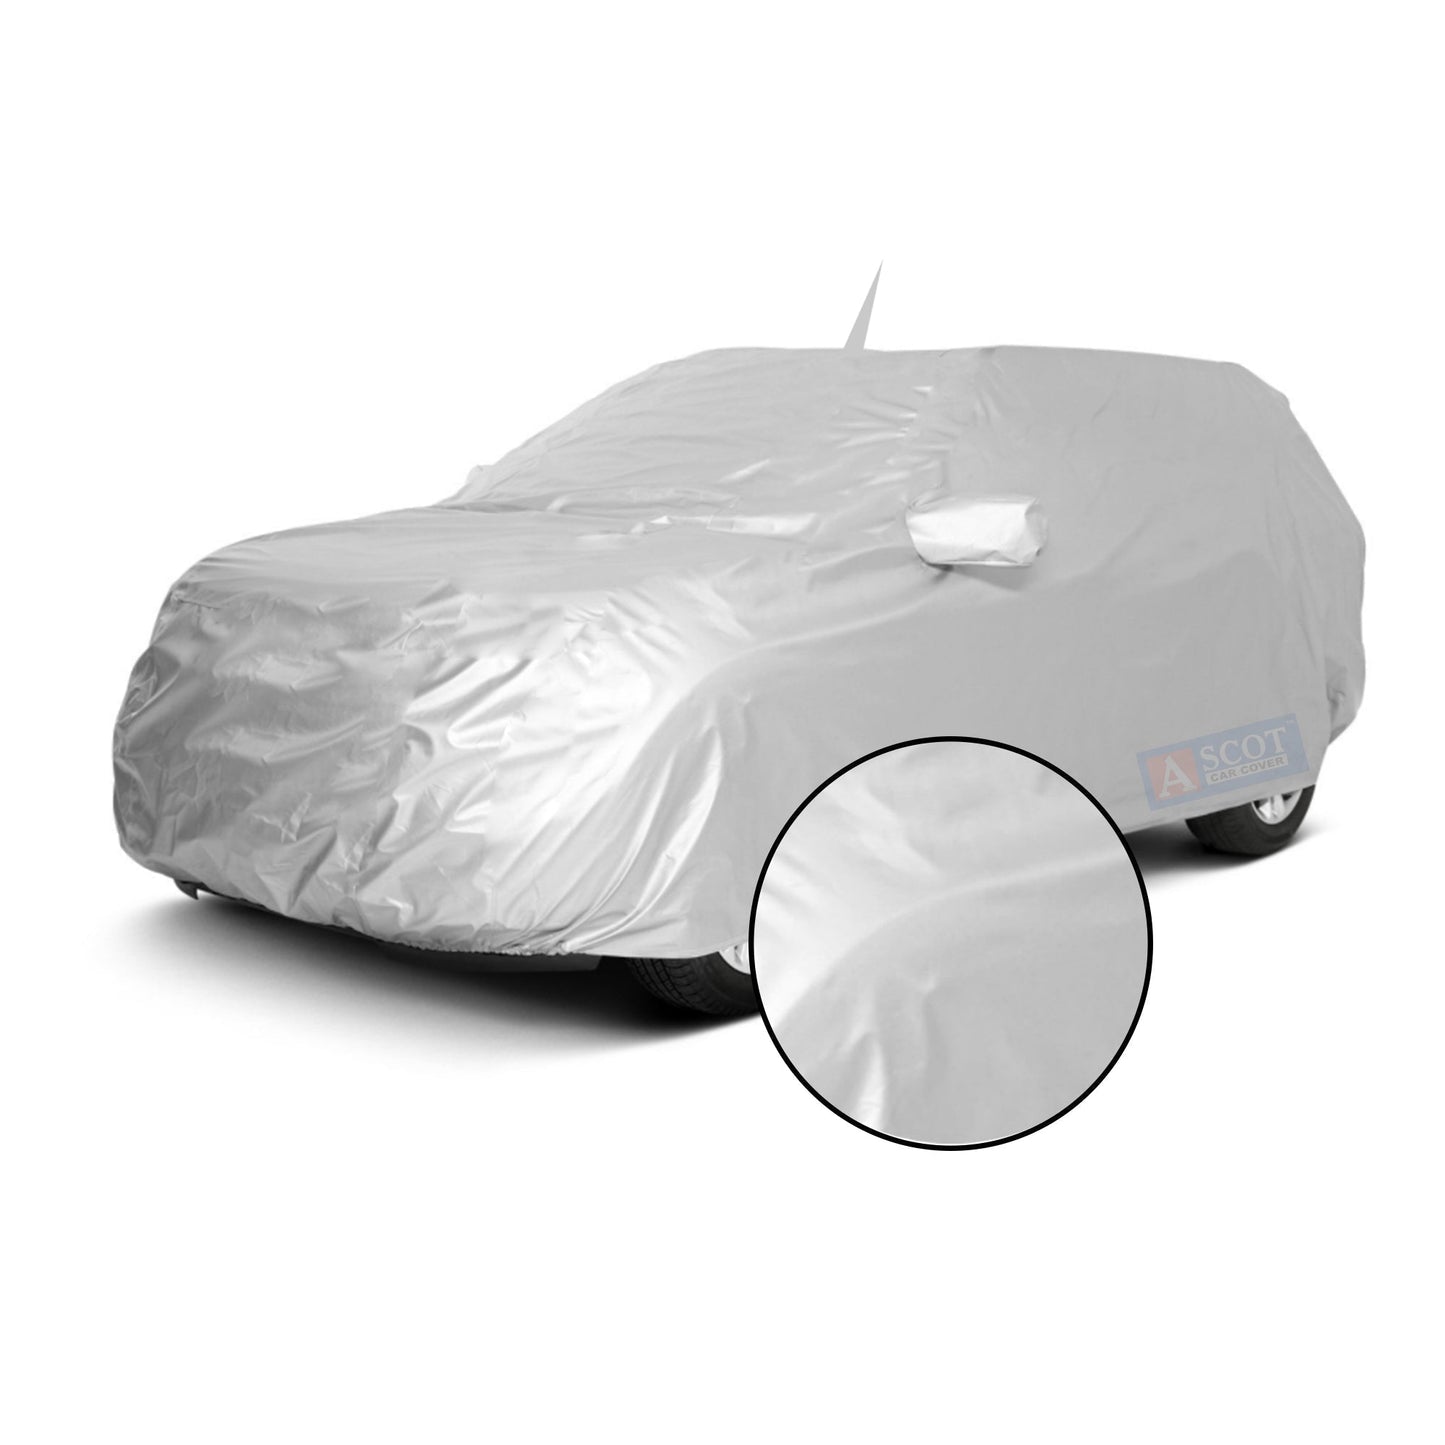 Ascot Chevrolet Tavera Car Body Cover Dust Proof, Trippel Stitched